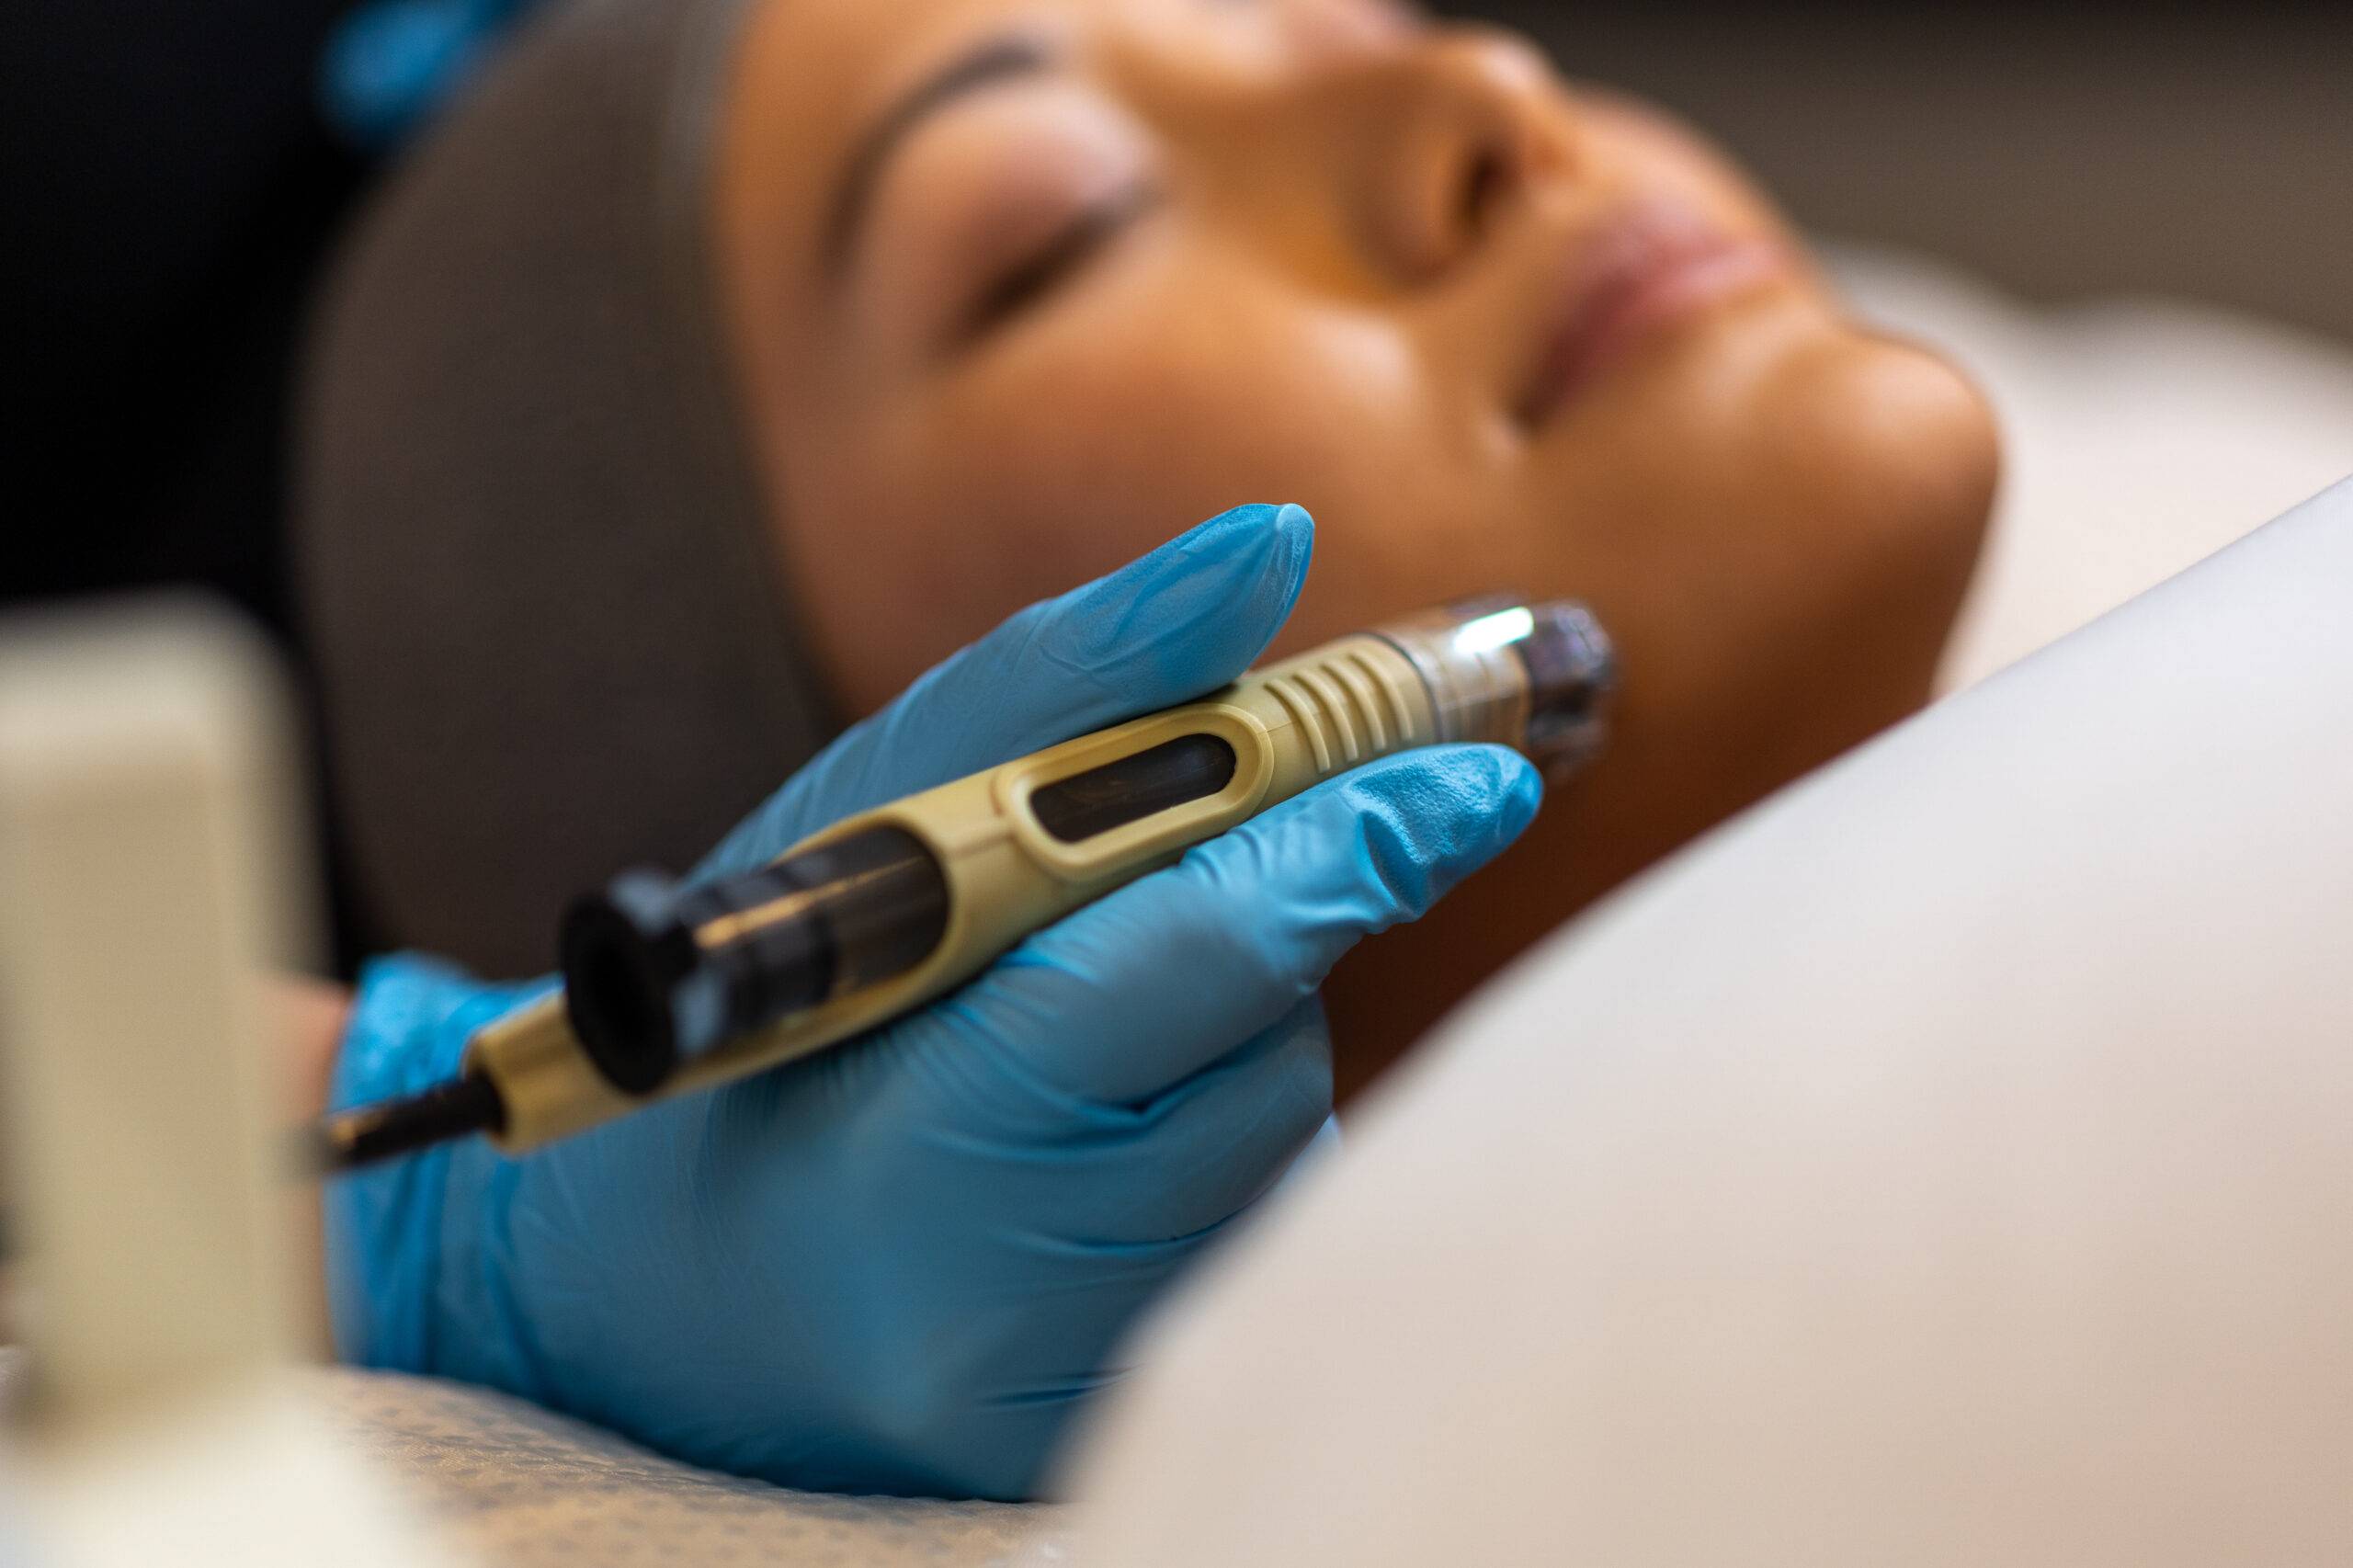 A woman reclines while receiving a microdermabrasion treatment; a professional holds a skin therapy device near her cheek, wearing blue gloves, indicating a sterile environment.